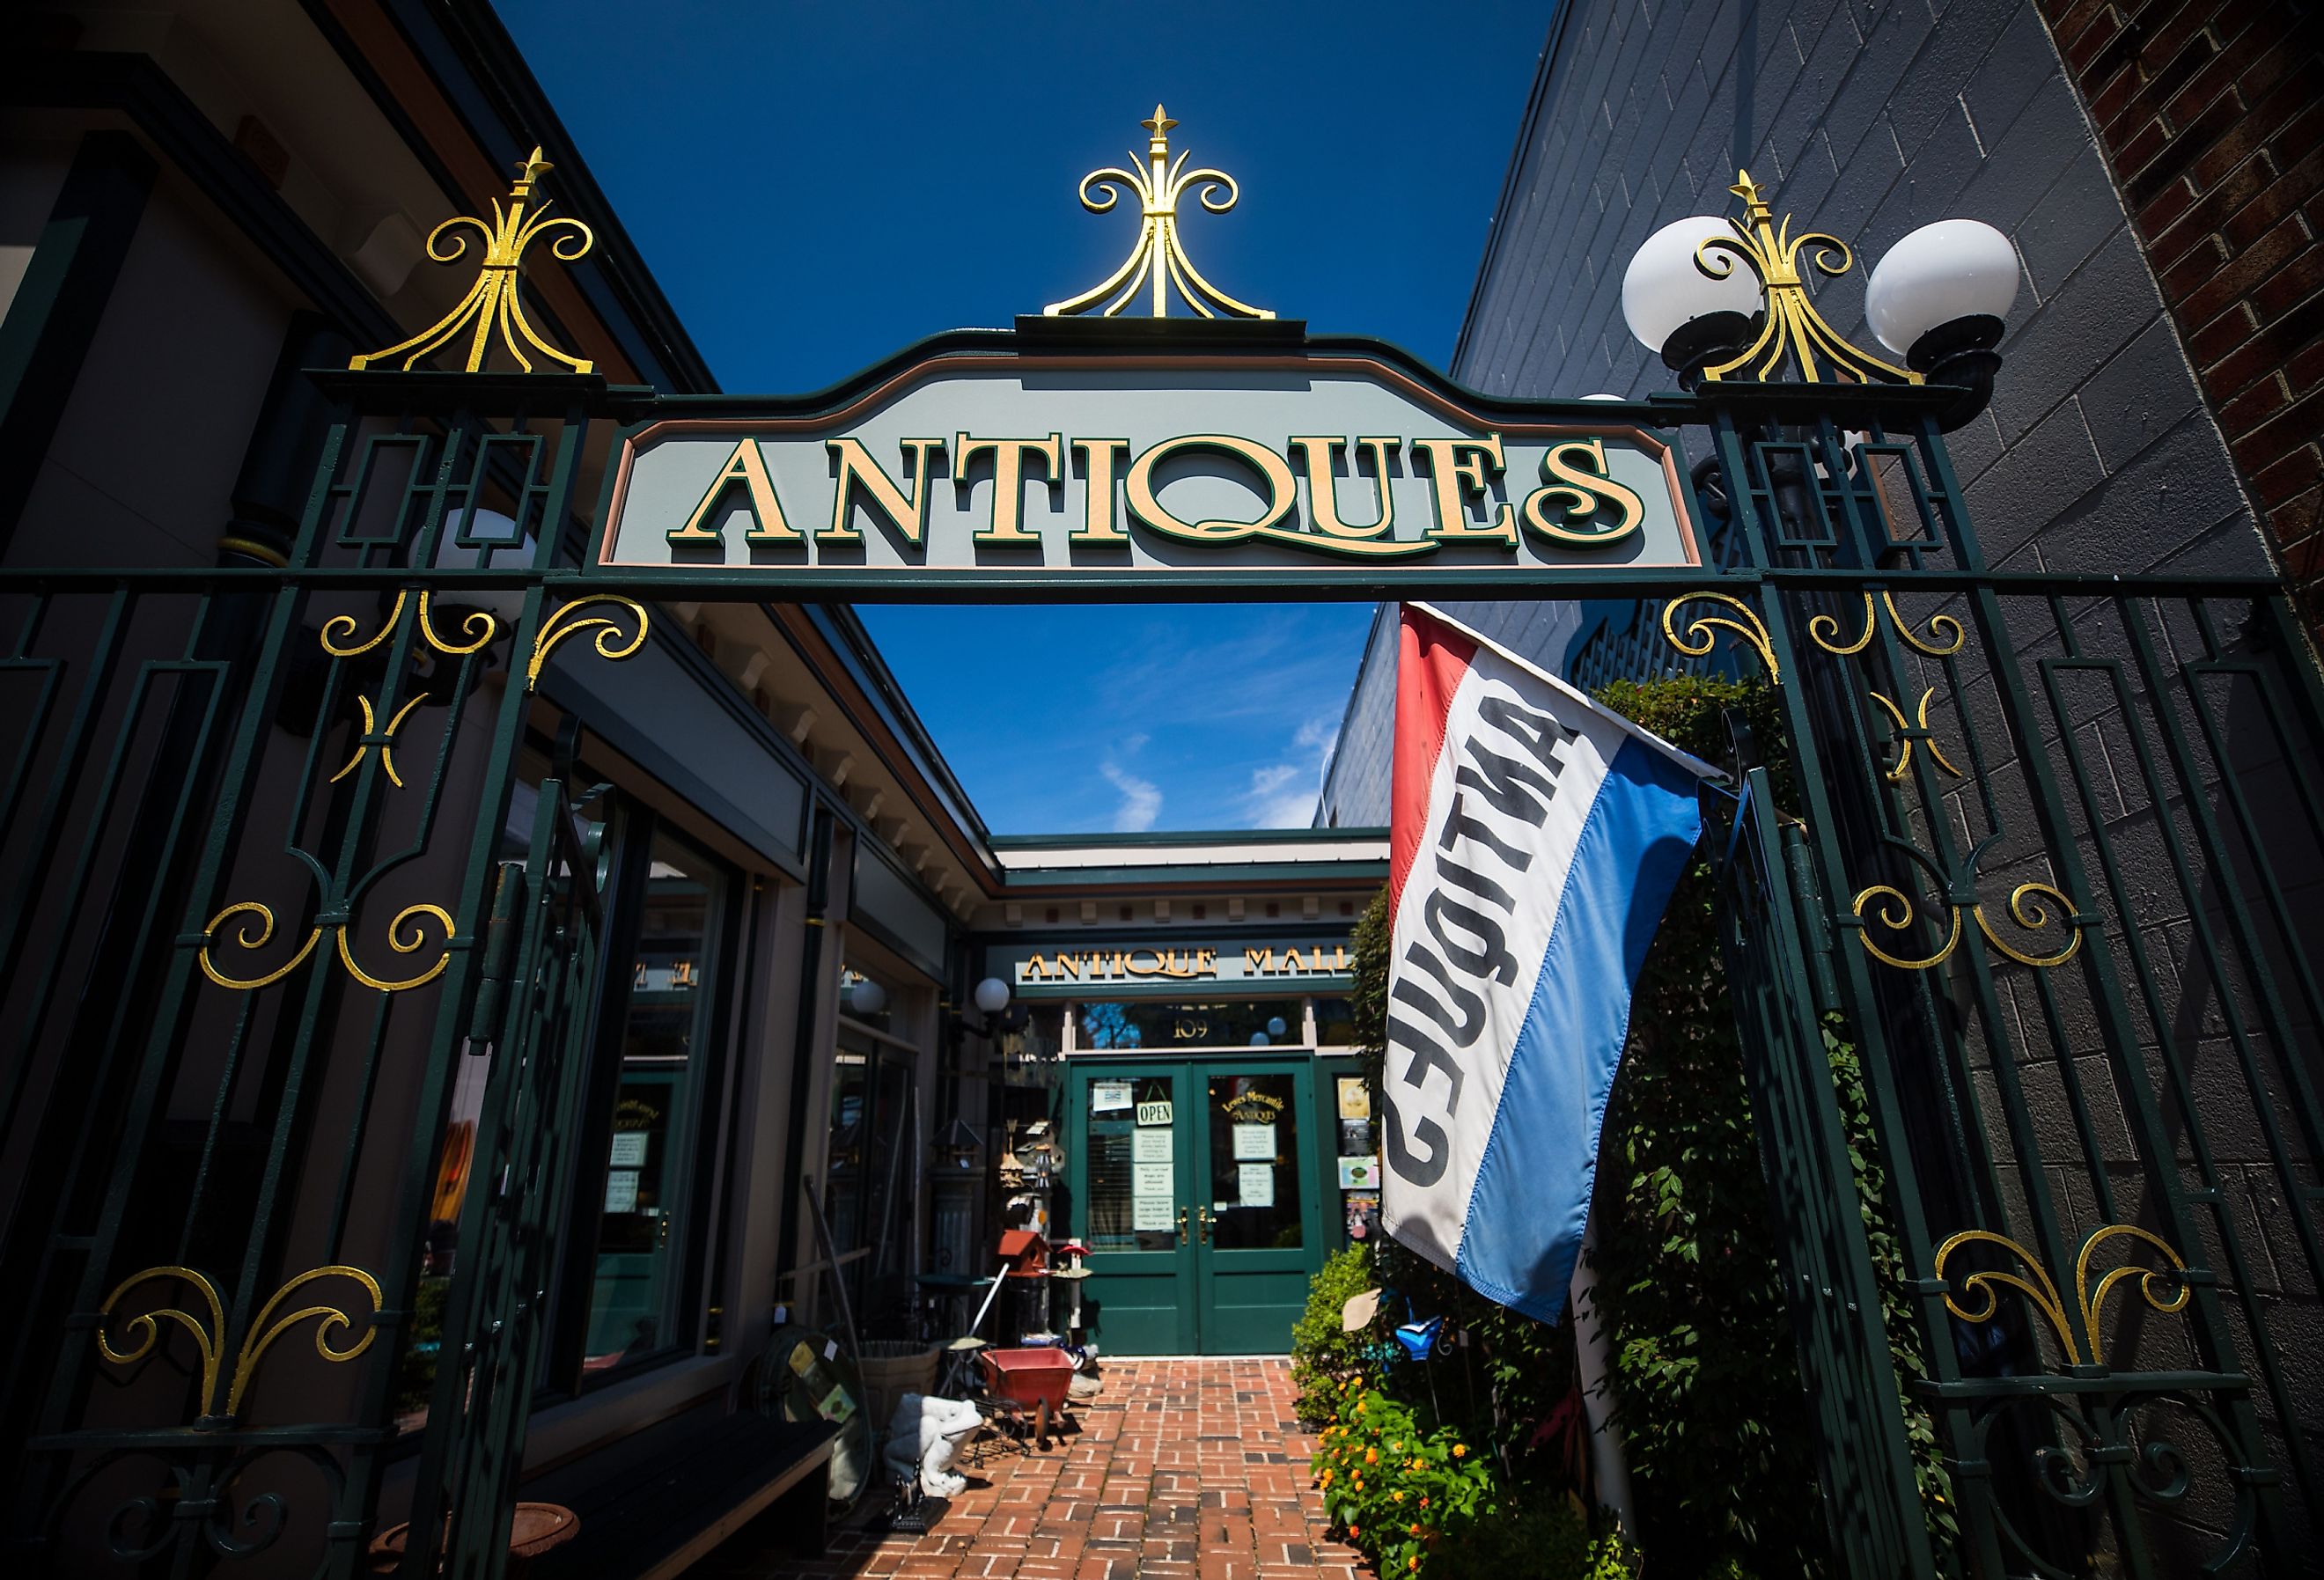 The exterior of an antique store in the shopping district of Lewes. Image credit Nicole Glass Photography via Shutterstock.